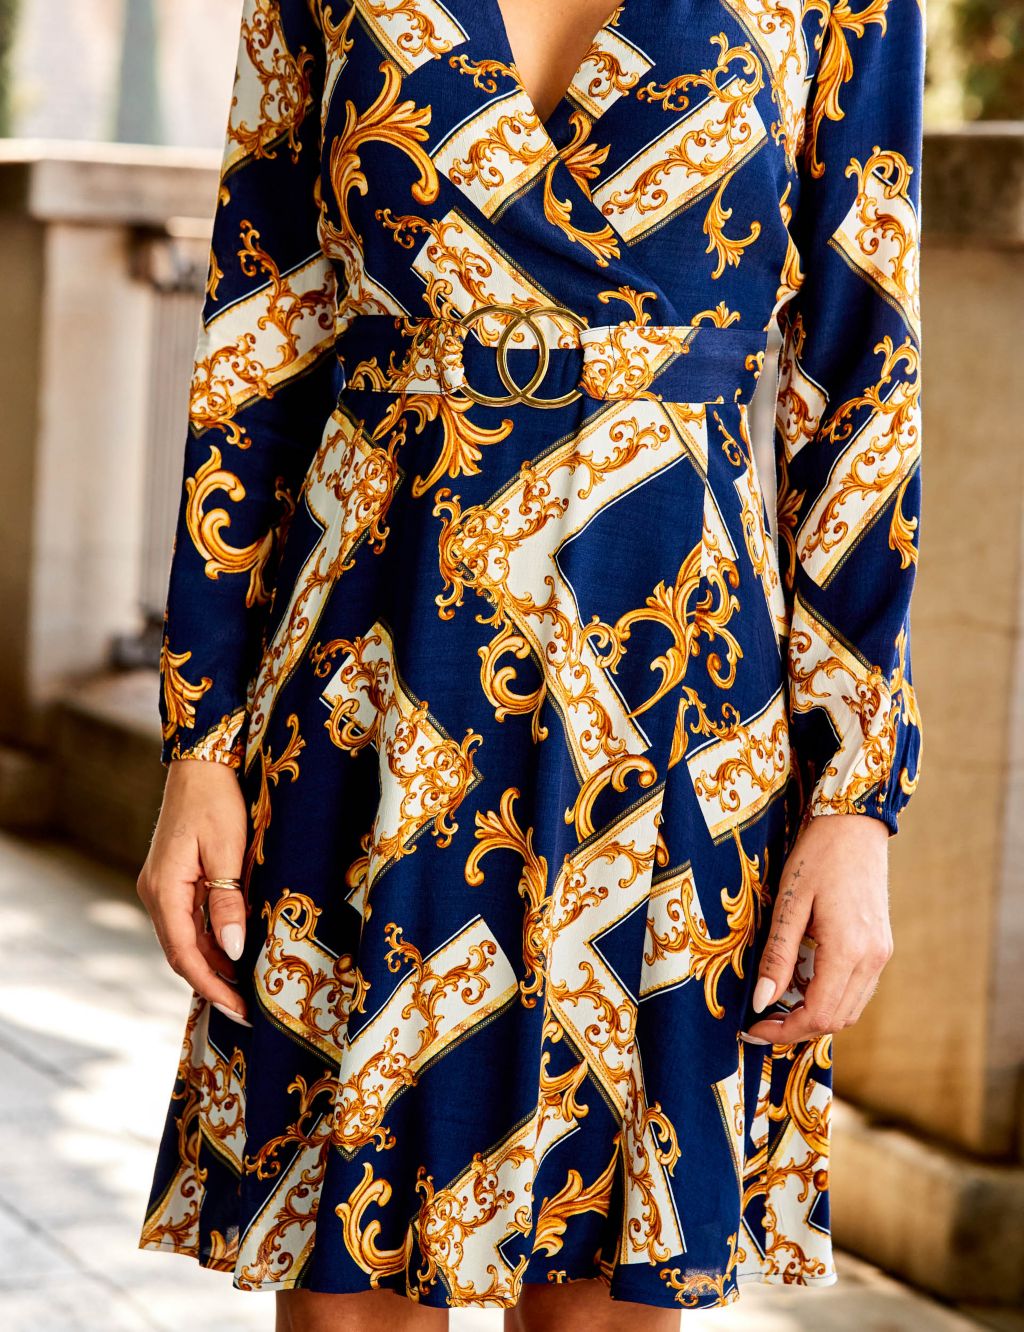 Baroque Print Belted Fit and Flare Dress image 3